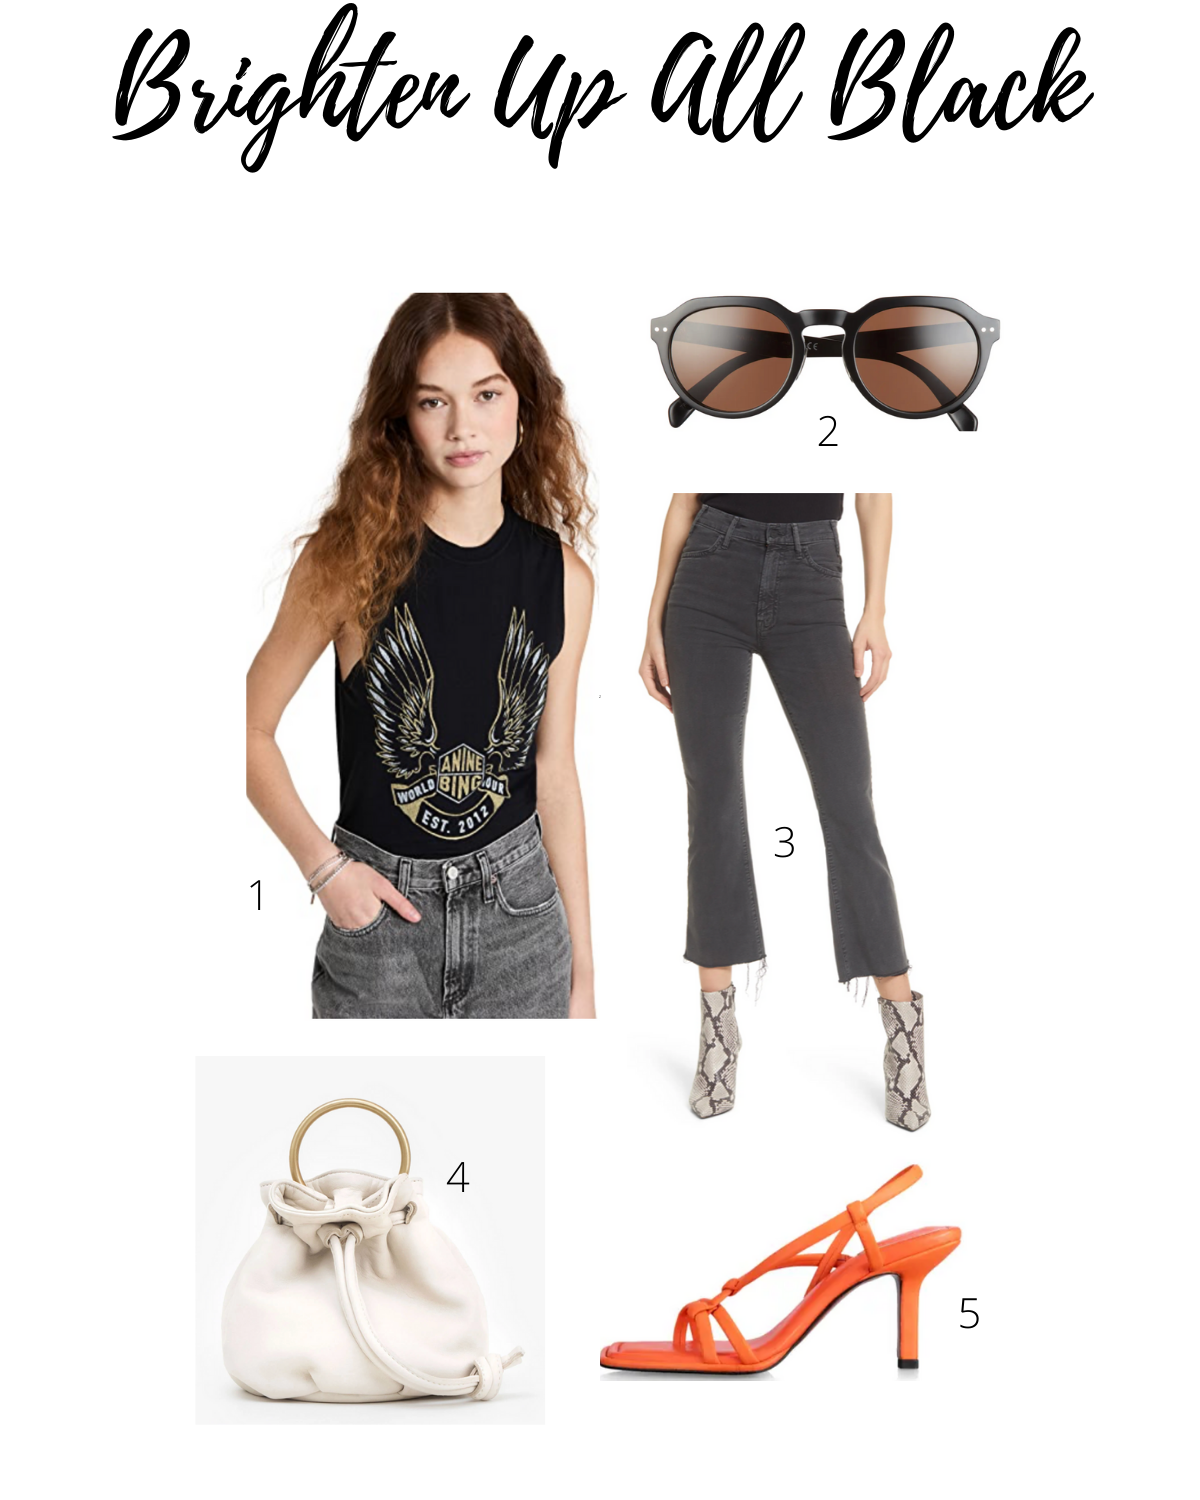 A style board featuring Frame heels in orange crush, black MOTHER jeans, and an Anine Bing graphic tee.